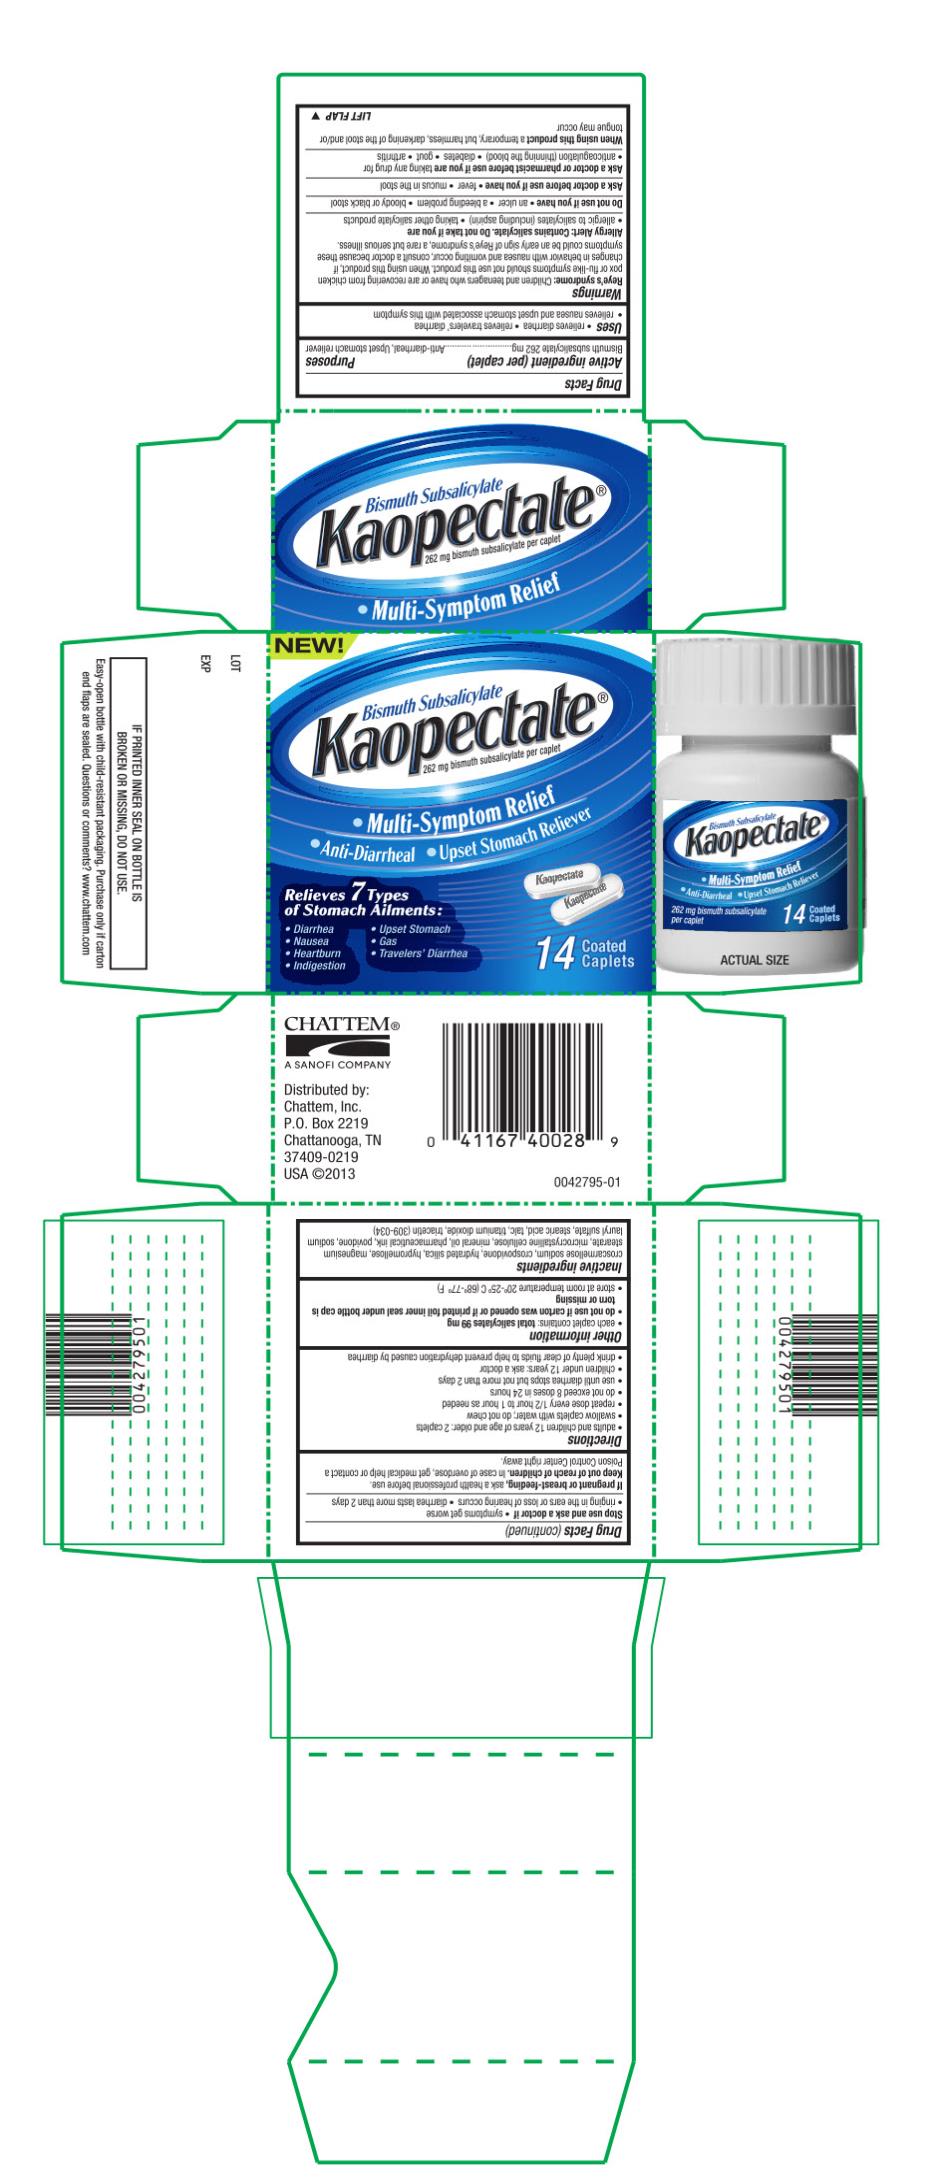 Bismuth Subsalicylate Kaopectate® Multi-Symptom Relief Anti-Diarrheal Upset Stomach Reliever Relieves 7 types of Stomach Ailments: Diarrhea Upset Stomach Nausea Gas Heartburn Travelers&quot; Diarrhea Indgestion 28 Coated Caplets